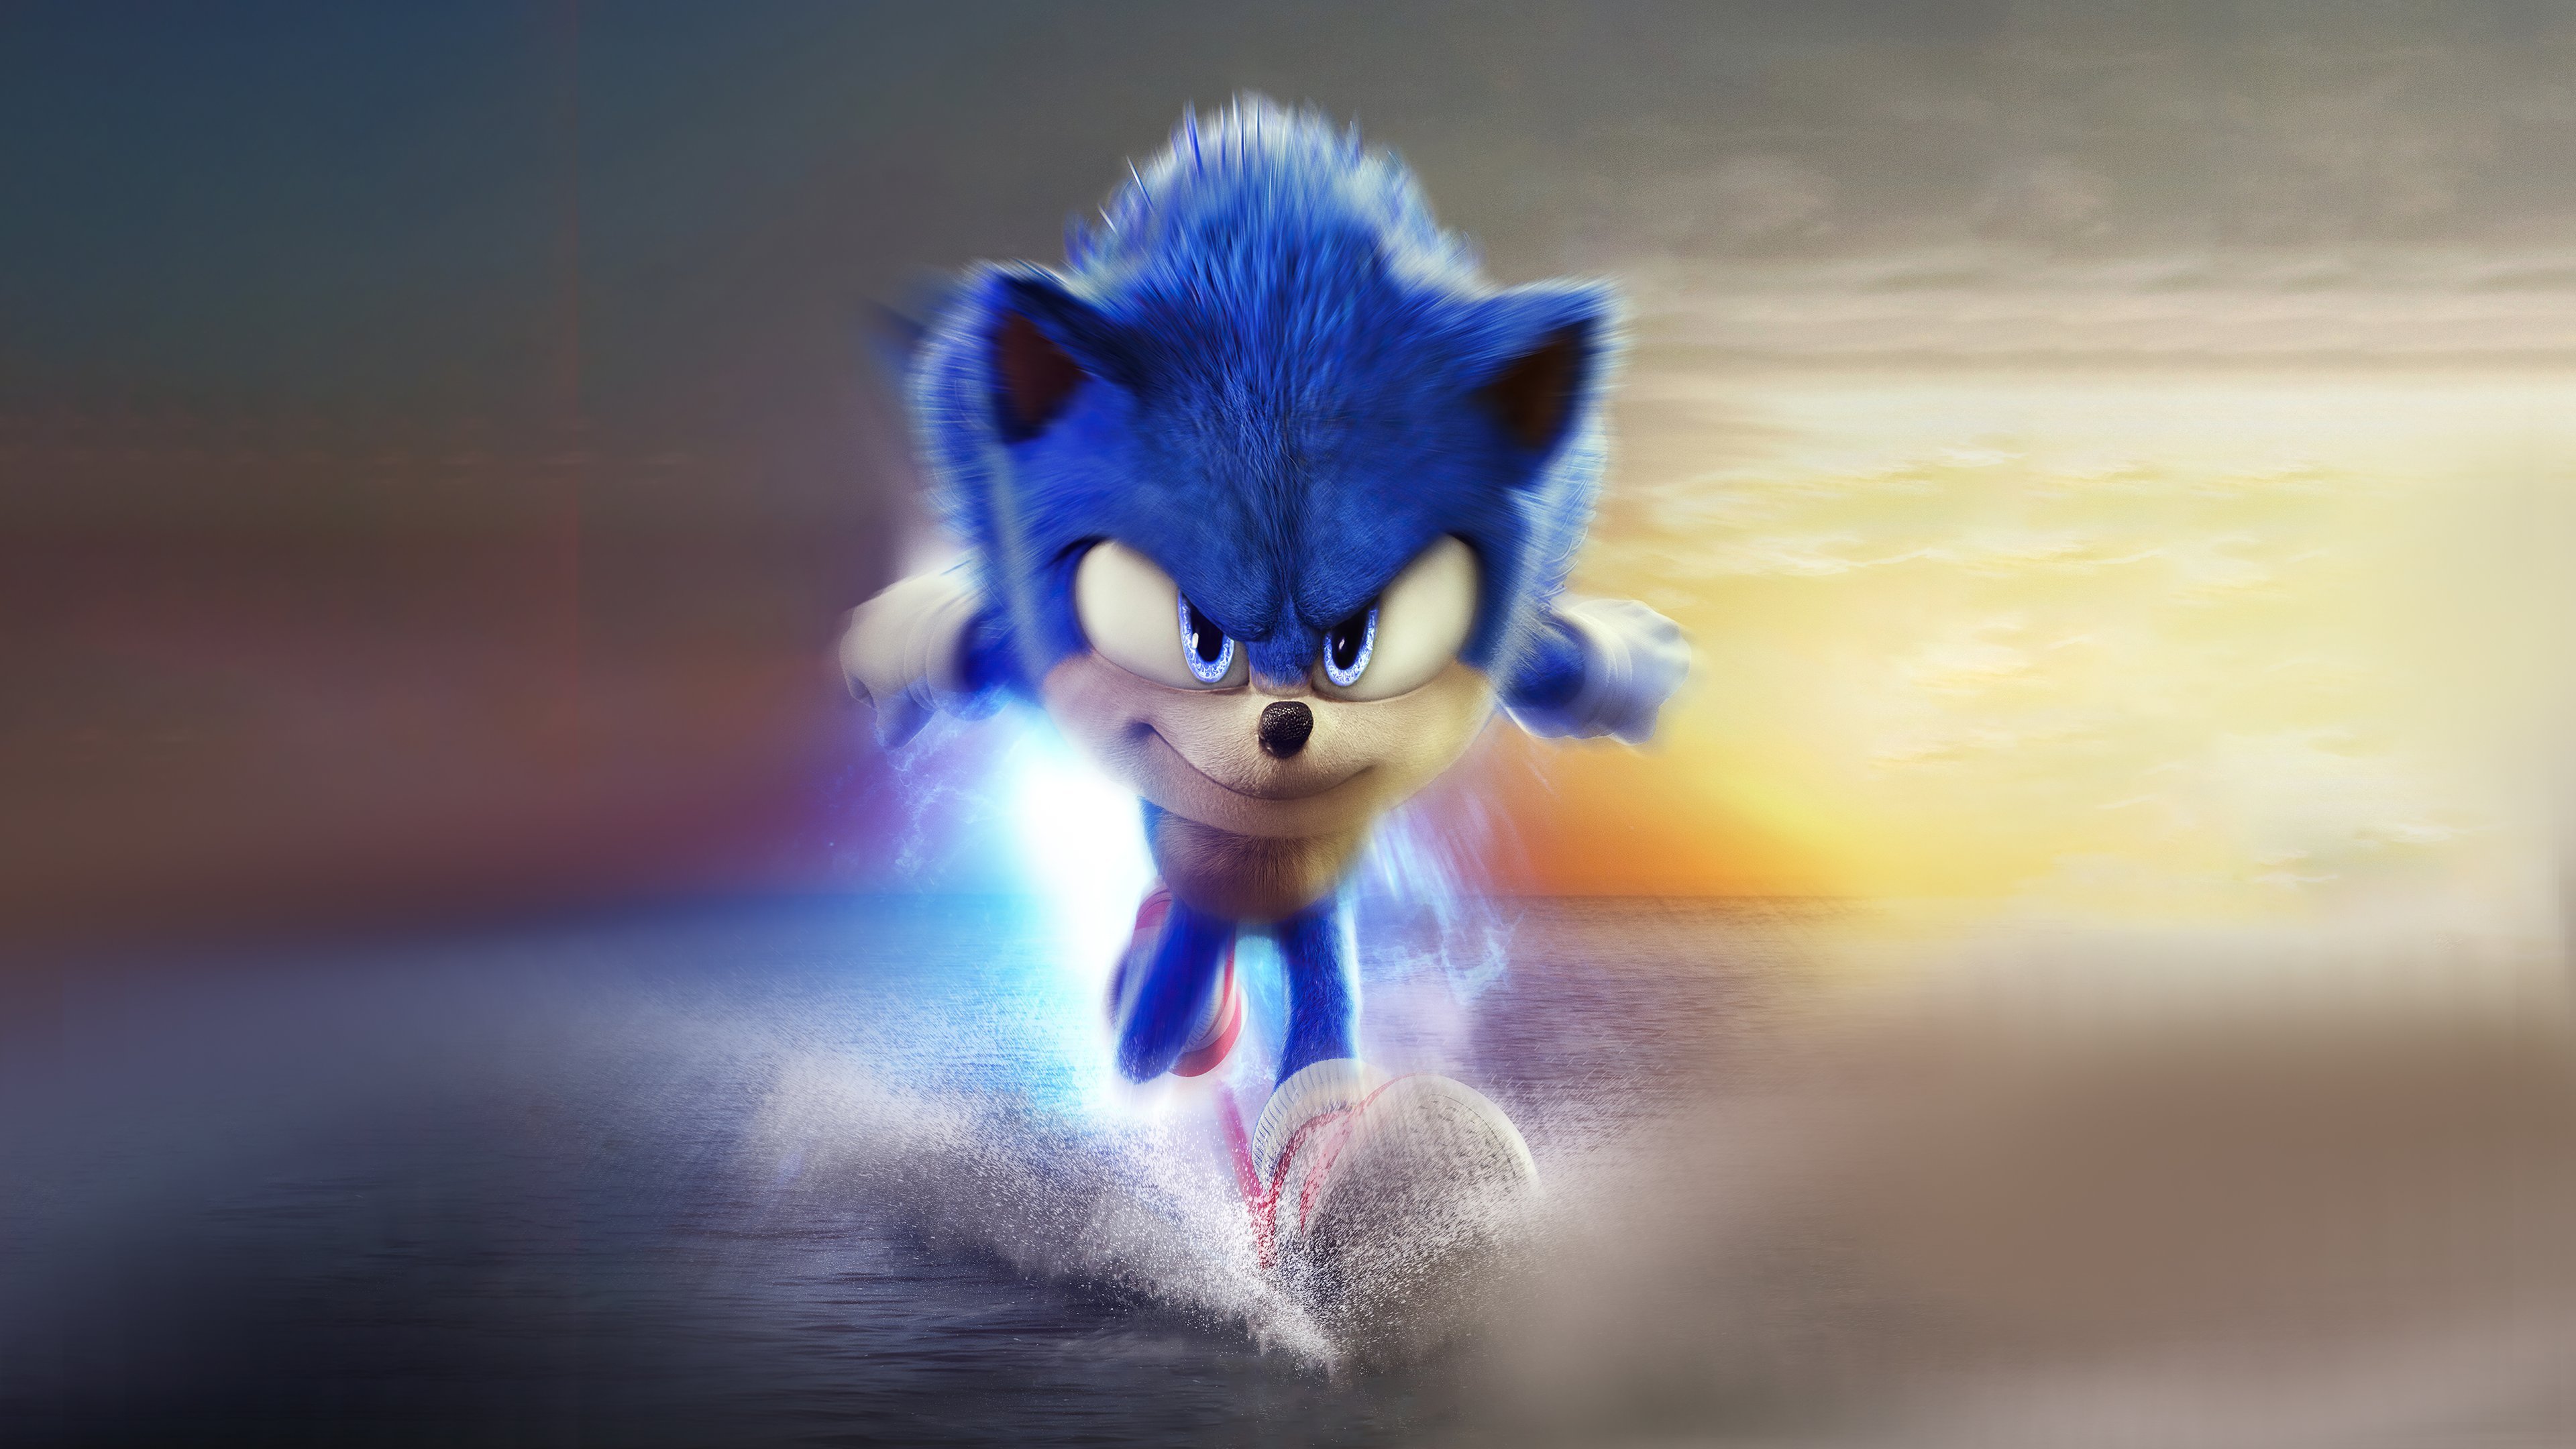 Could Sonic the Hedgehog survive running at supersonic speeds